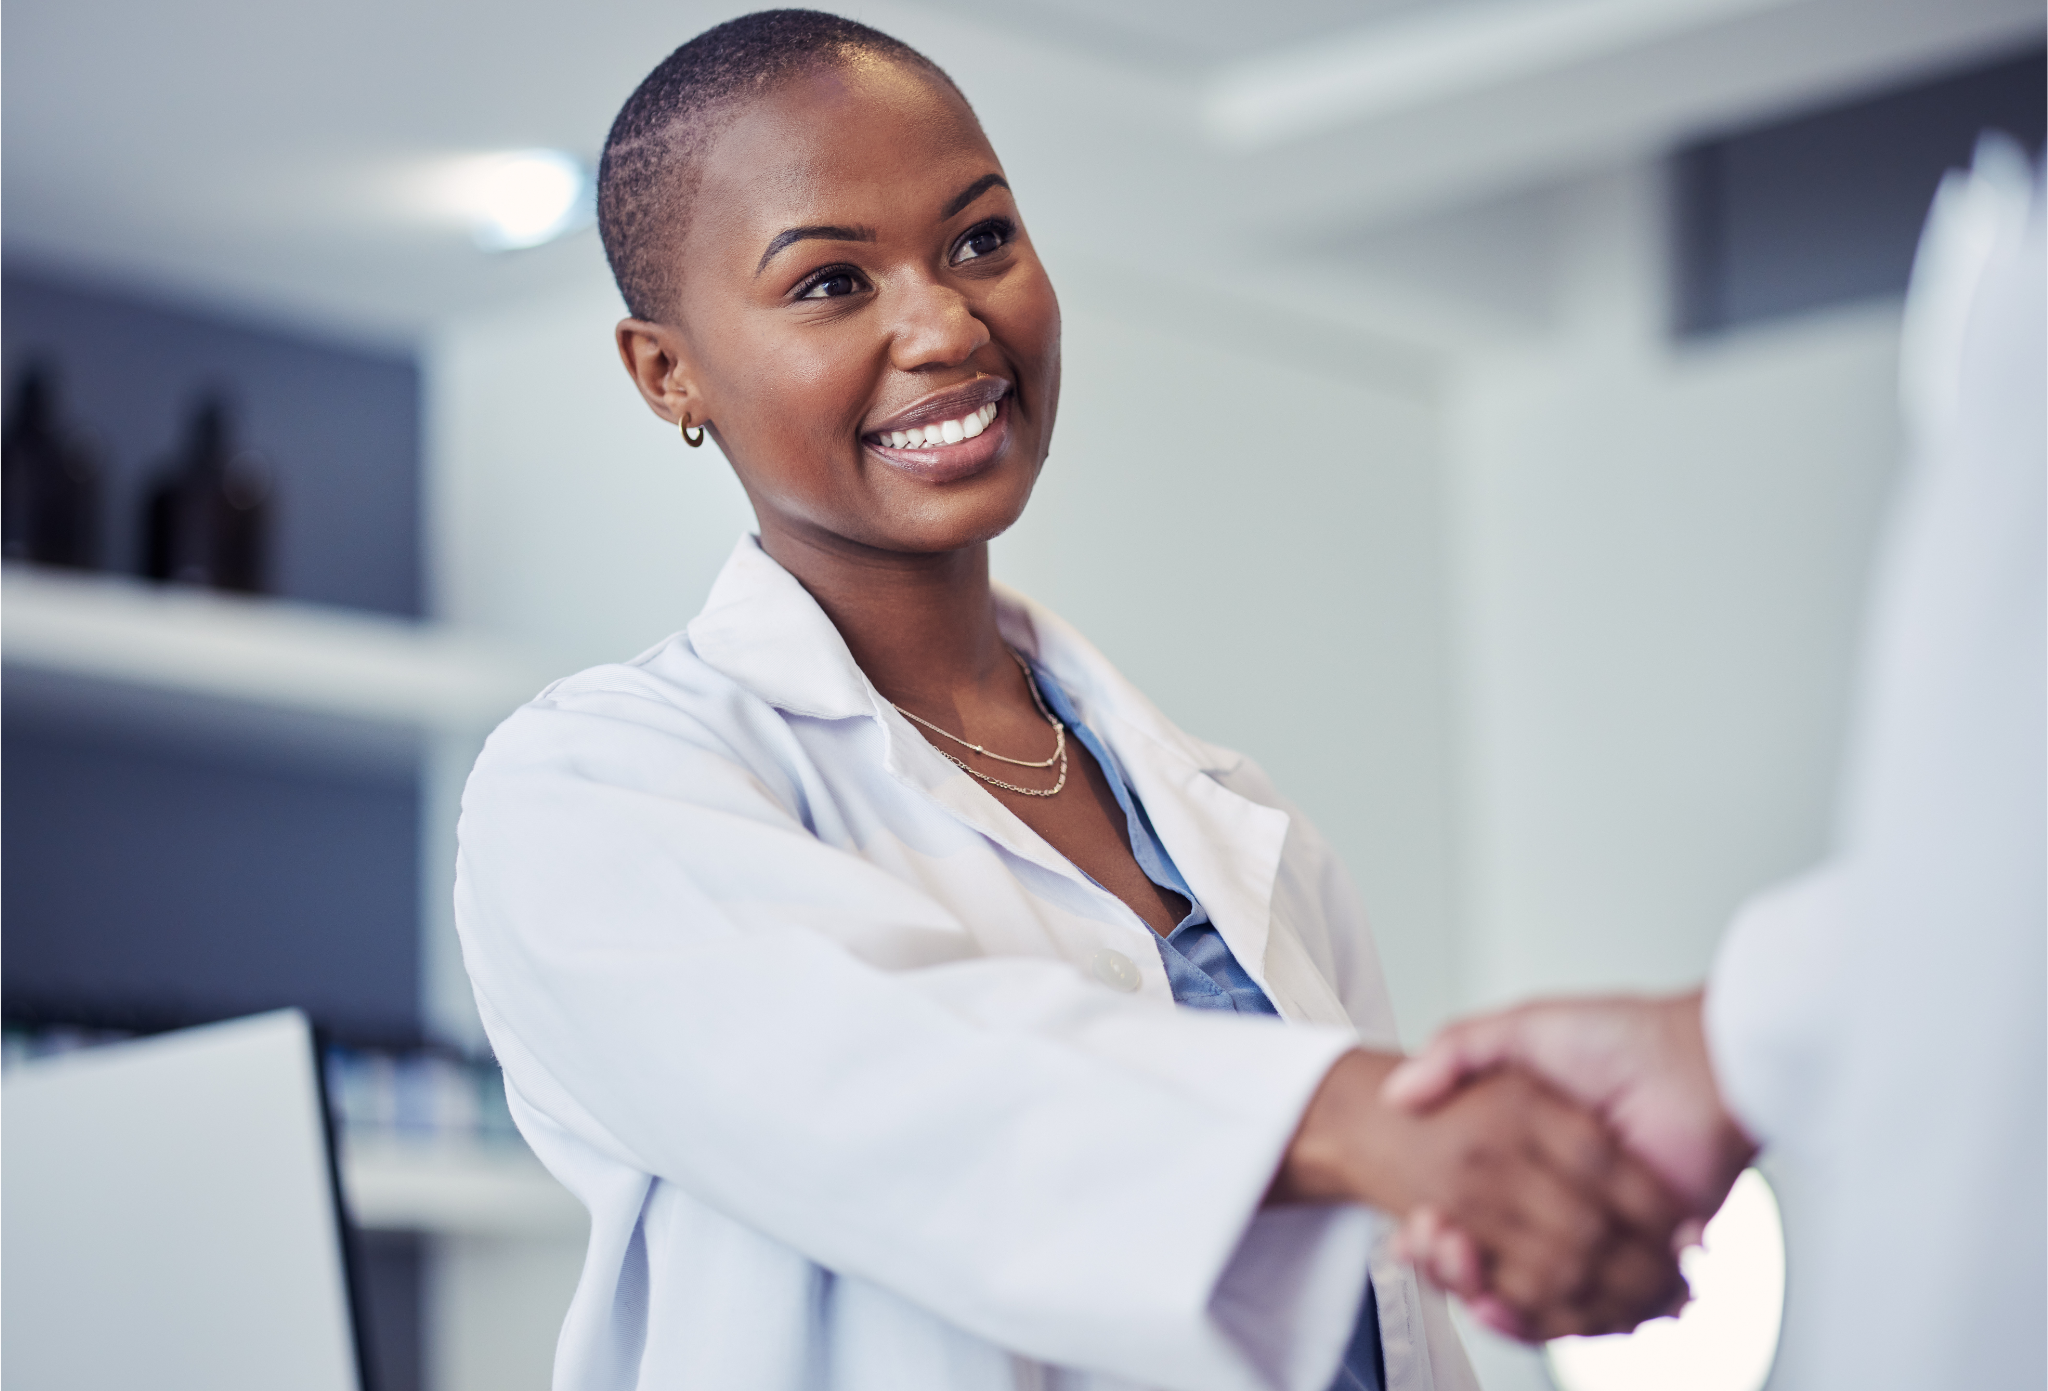 Female doctor smiling and sharing hands with an administrator